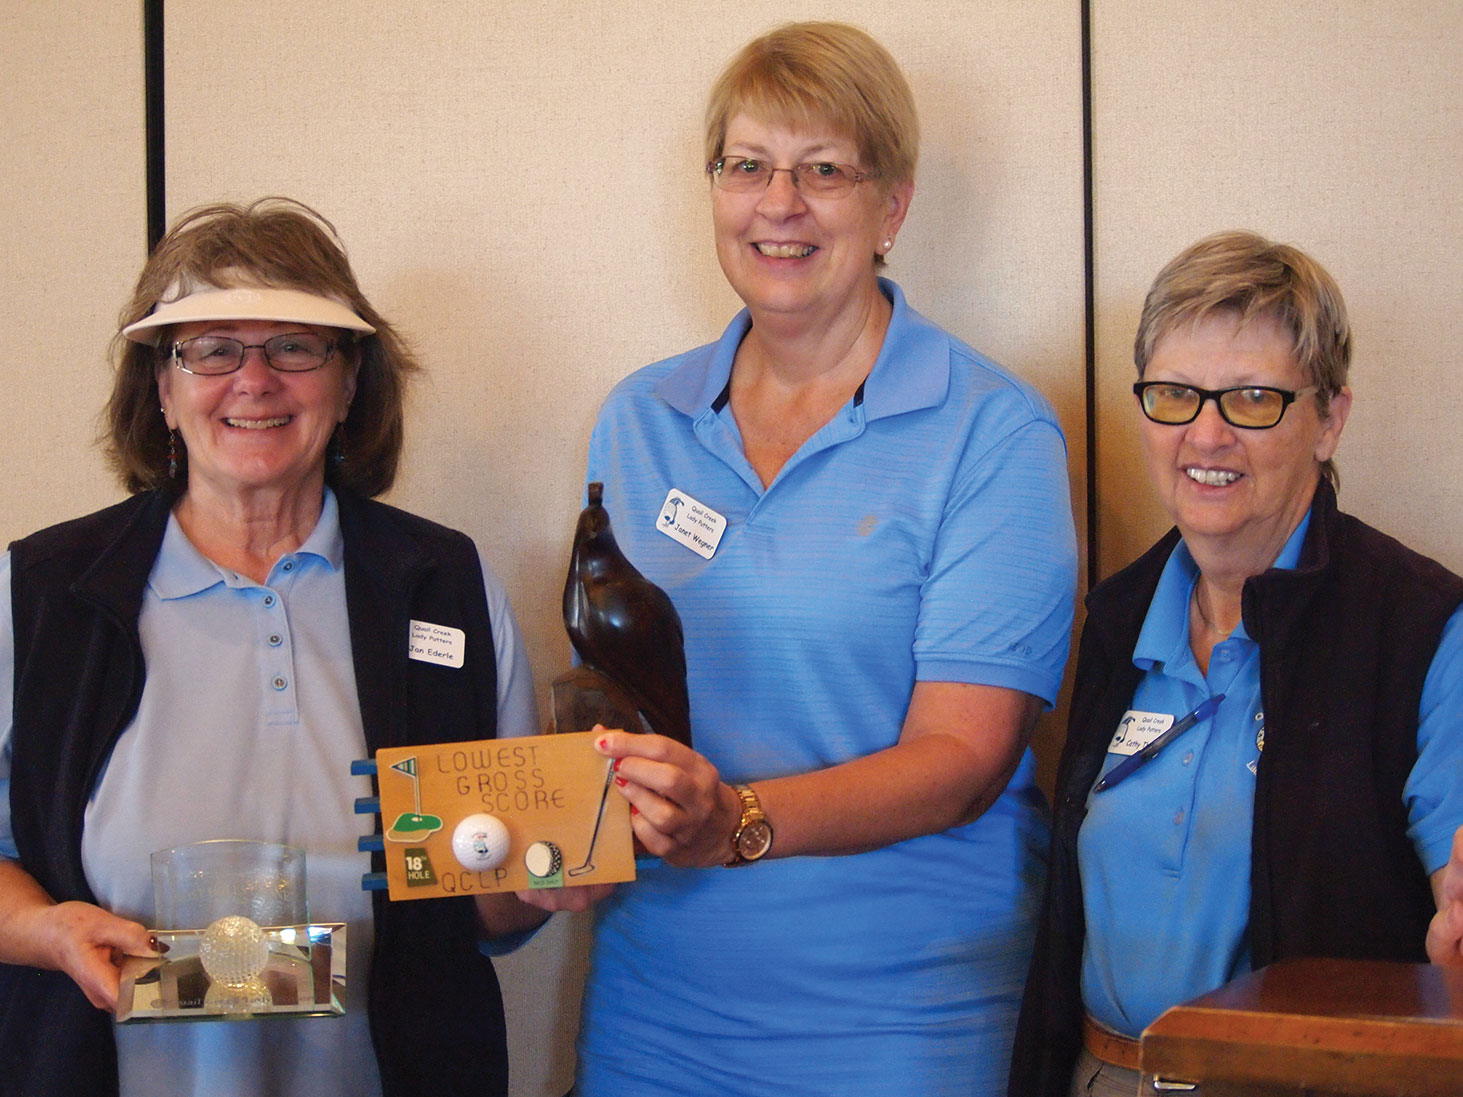 Jan Ederle holds the Crystal hole-in-one plaque and award plaque for the lowest gross score while Club Vice President Janet Wegner holds the Coveted Quail for low net score, with President Cathy Thiele looking on; photo by Sylvia Butler.